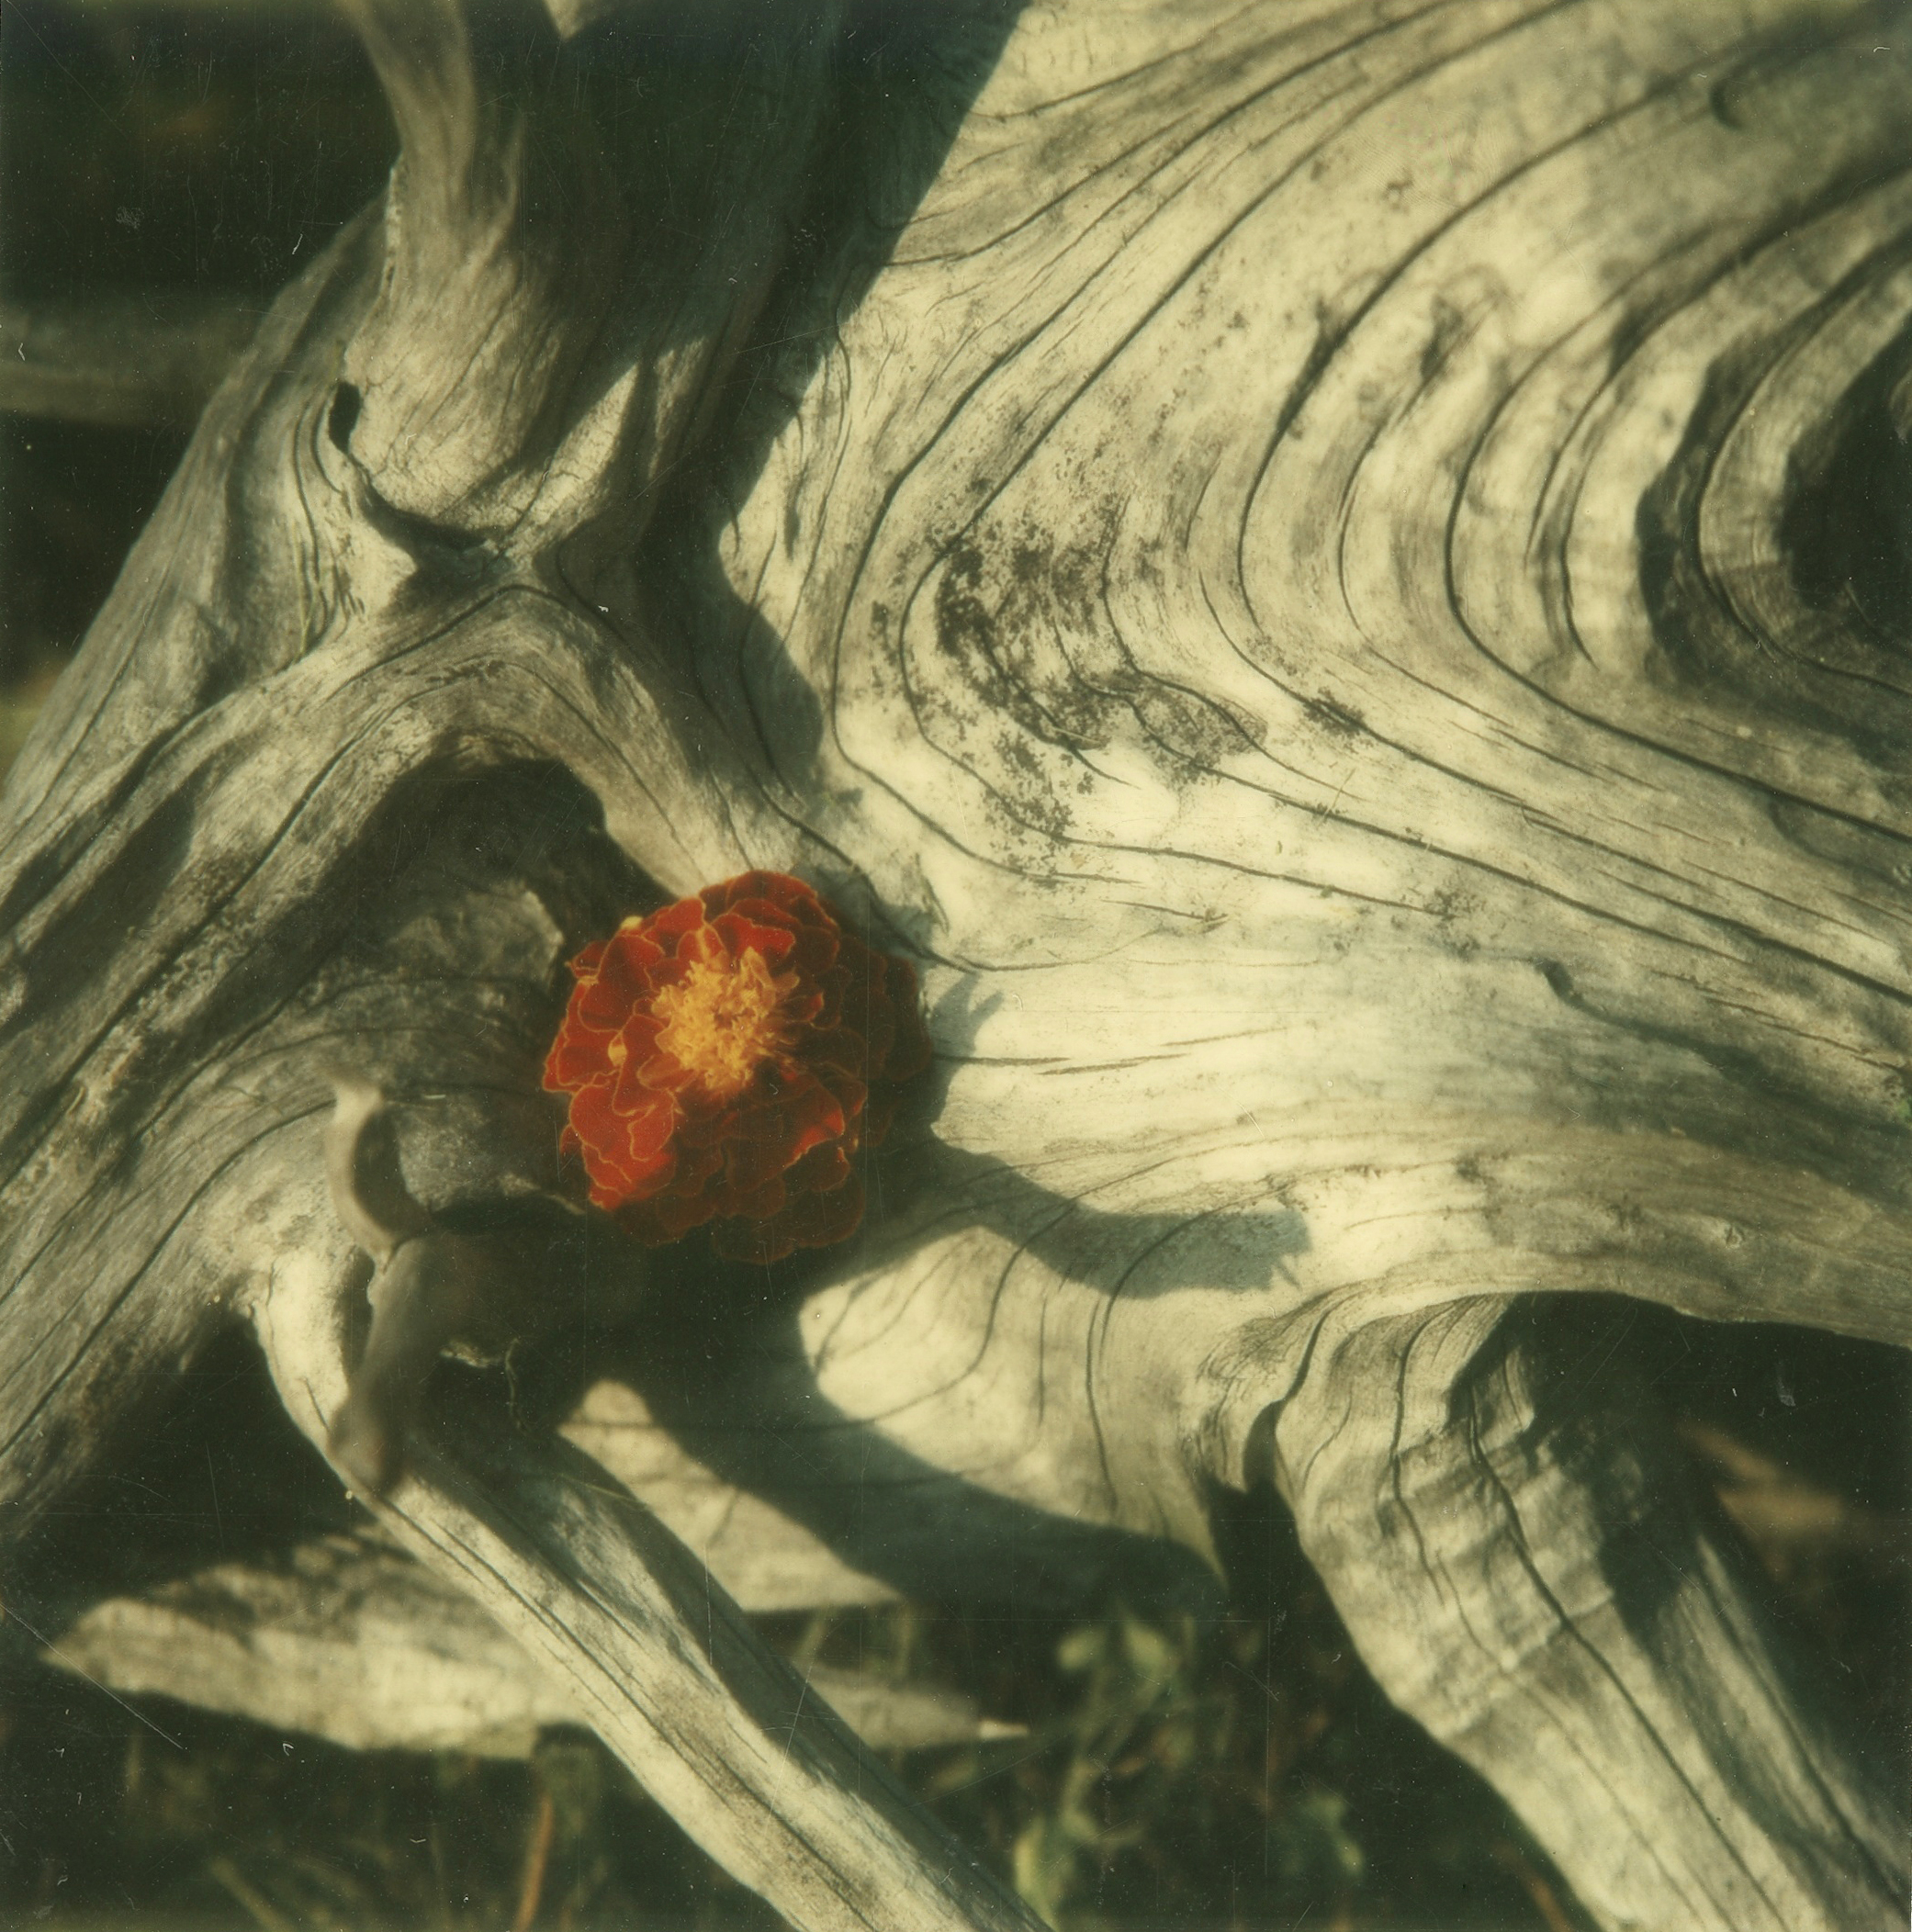 Wood and flower, photographed with a Polaroid SX-70 camera, 1972.